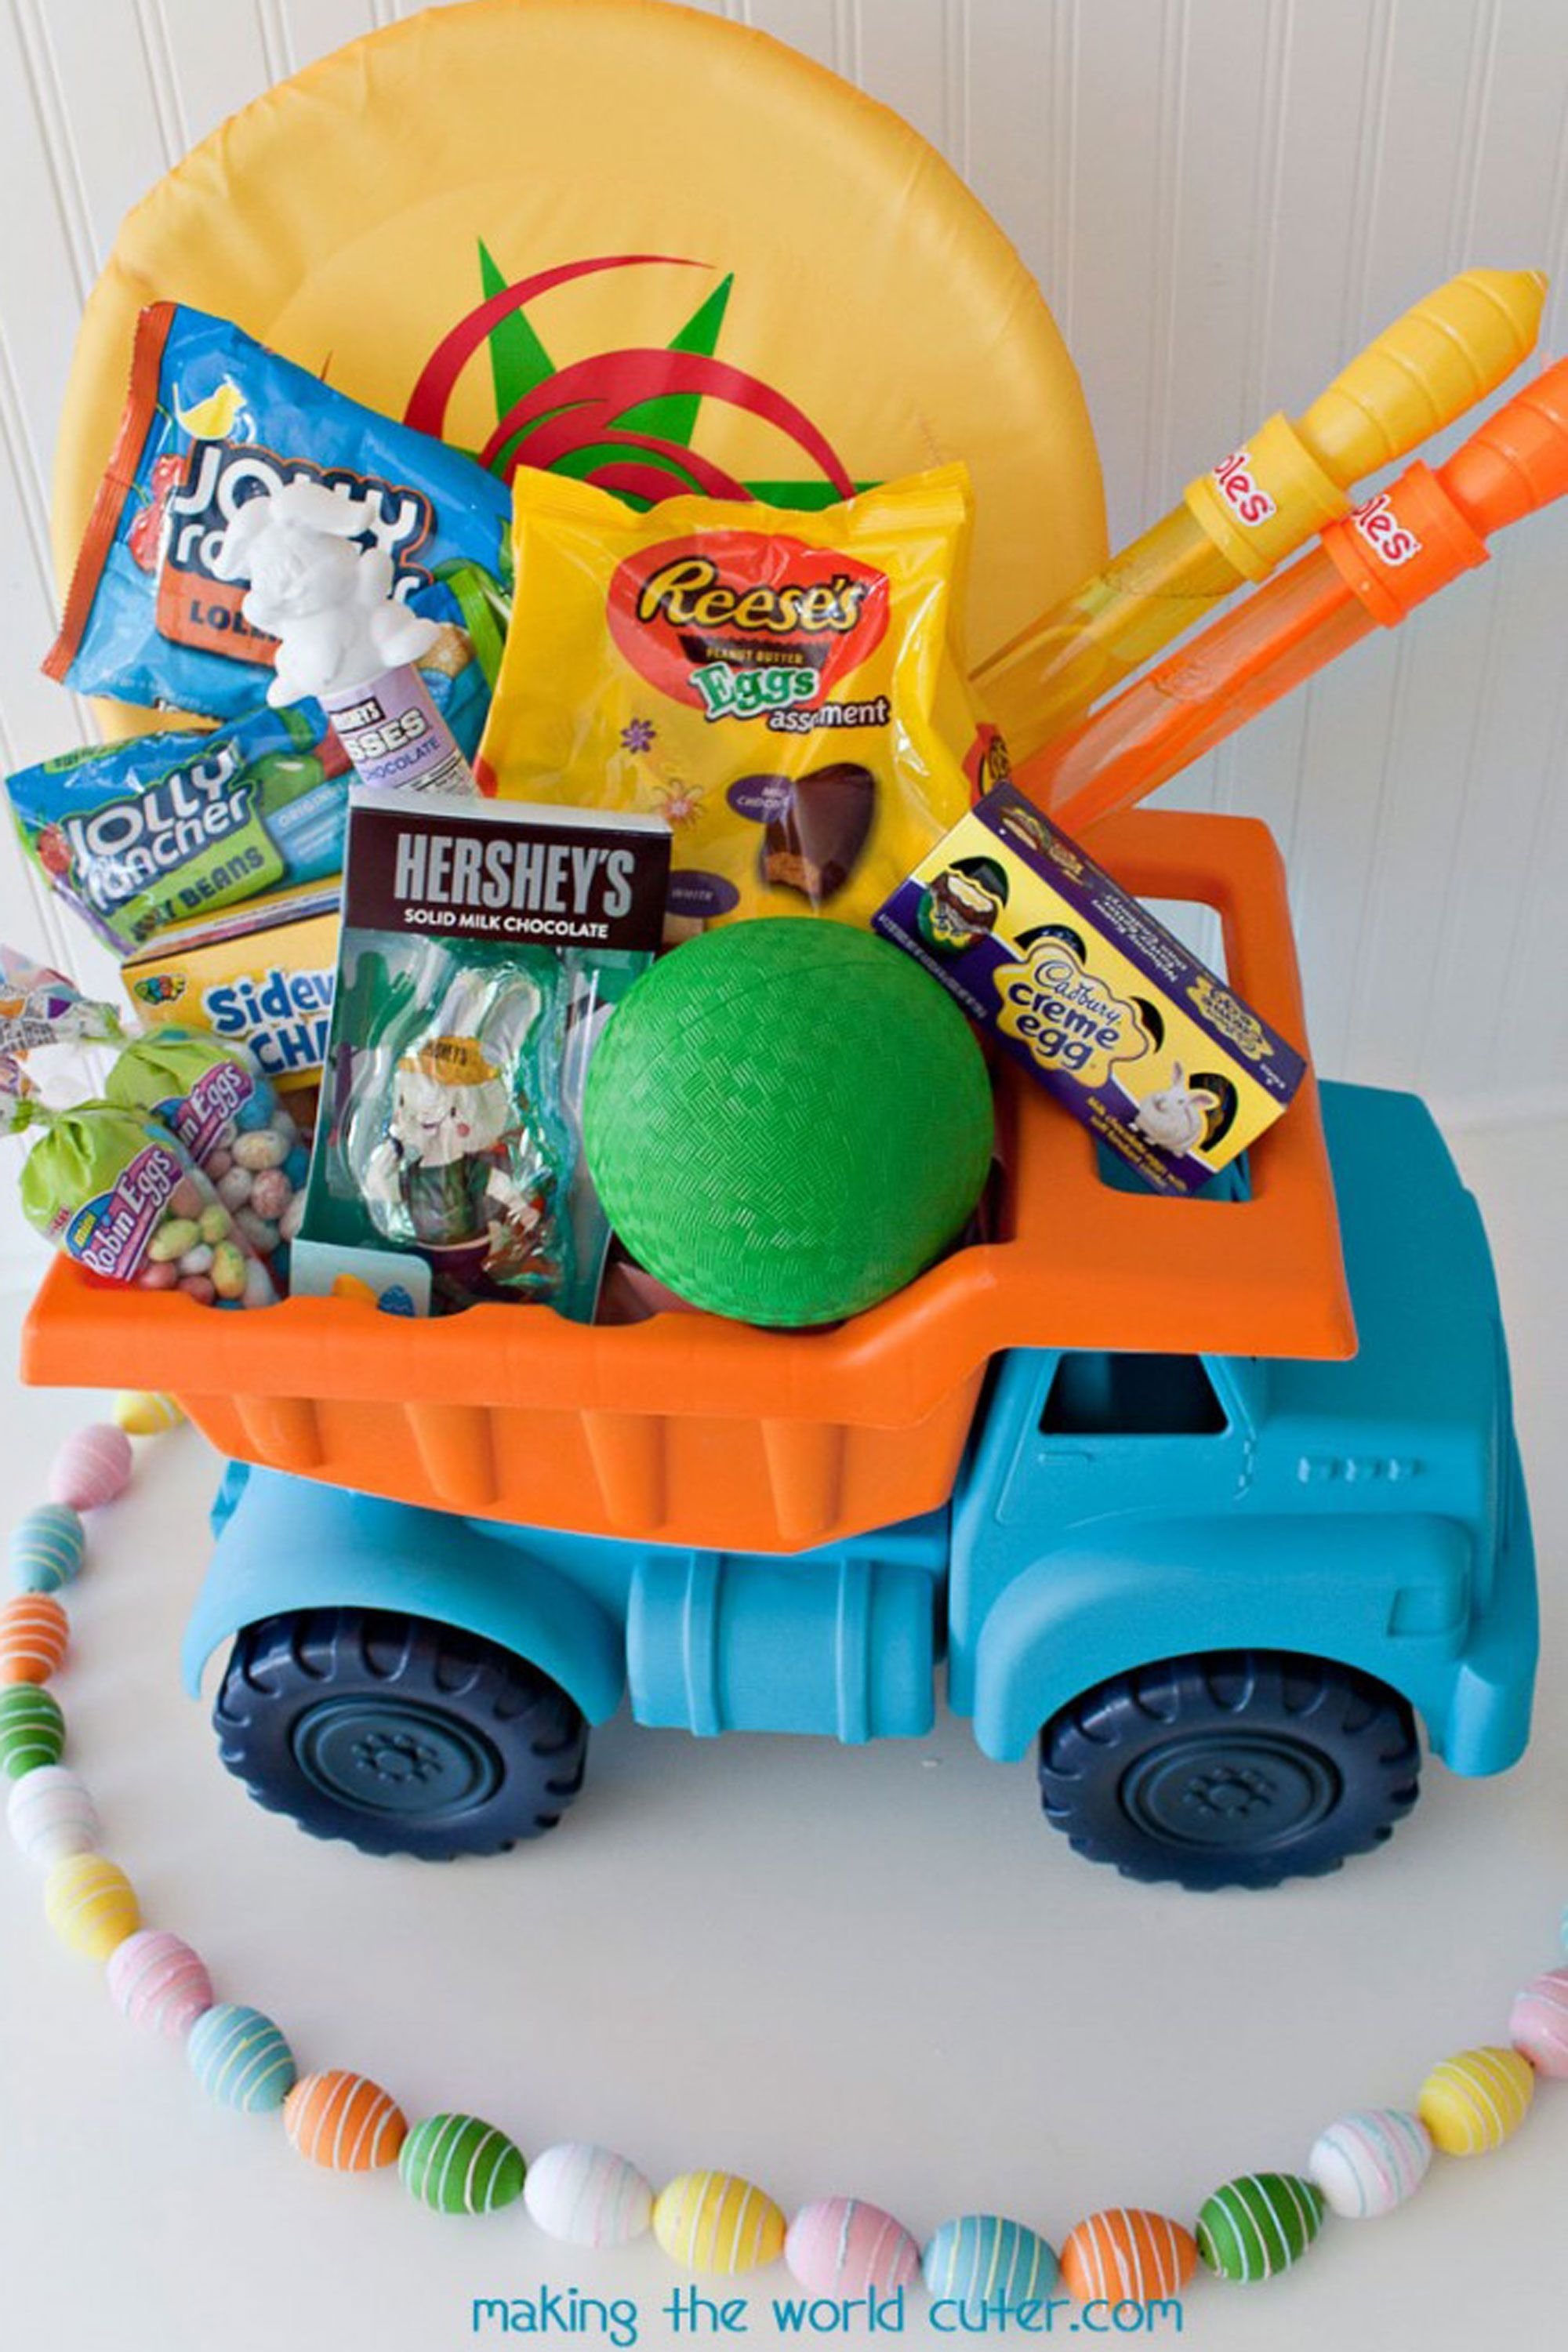 10 Gorgeous Easter Gift Ideas For Kids 16 easter basket ideas for kids best easter gifts for babies 7 2022